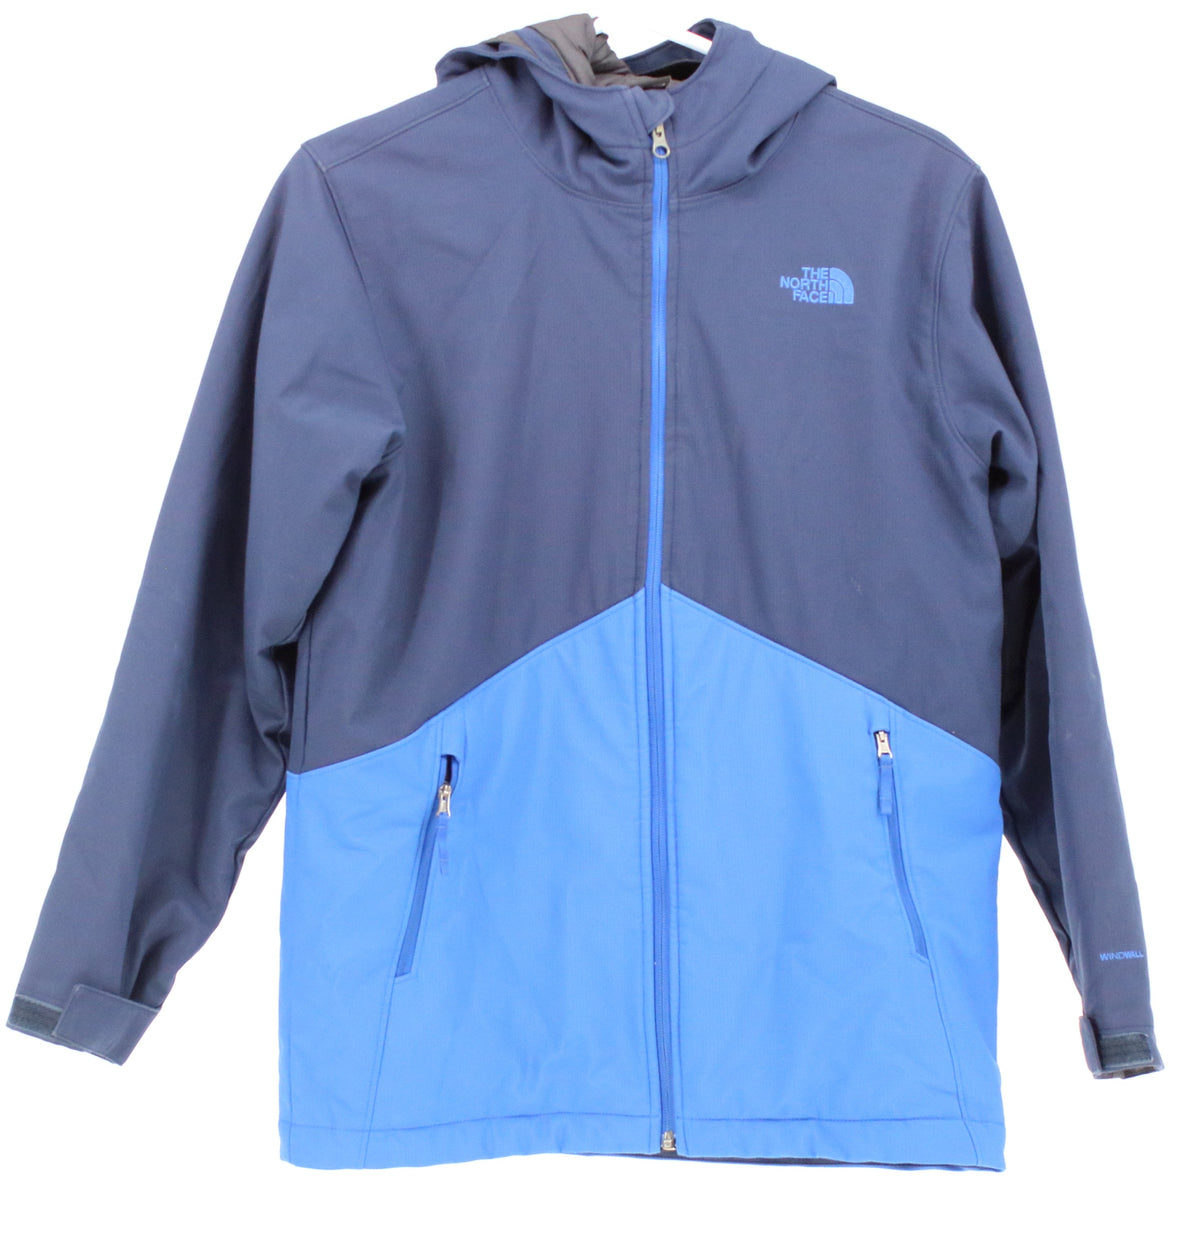 The North Face Navy Blue and Royal Blue Zip Up Boy's Jacket